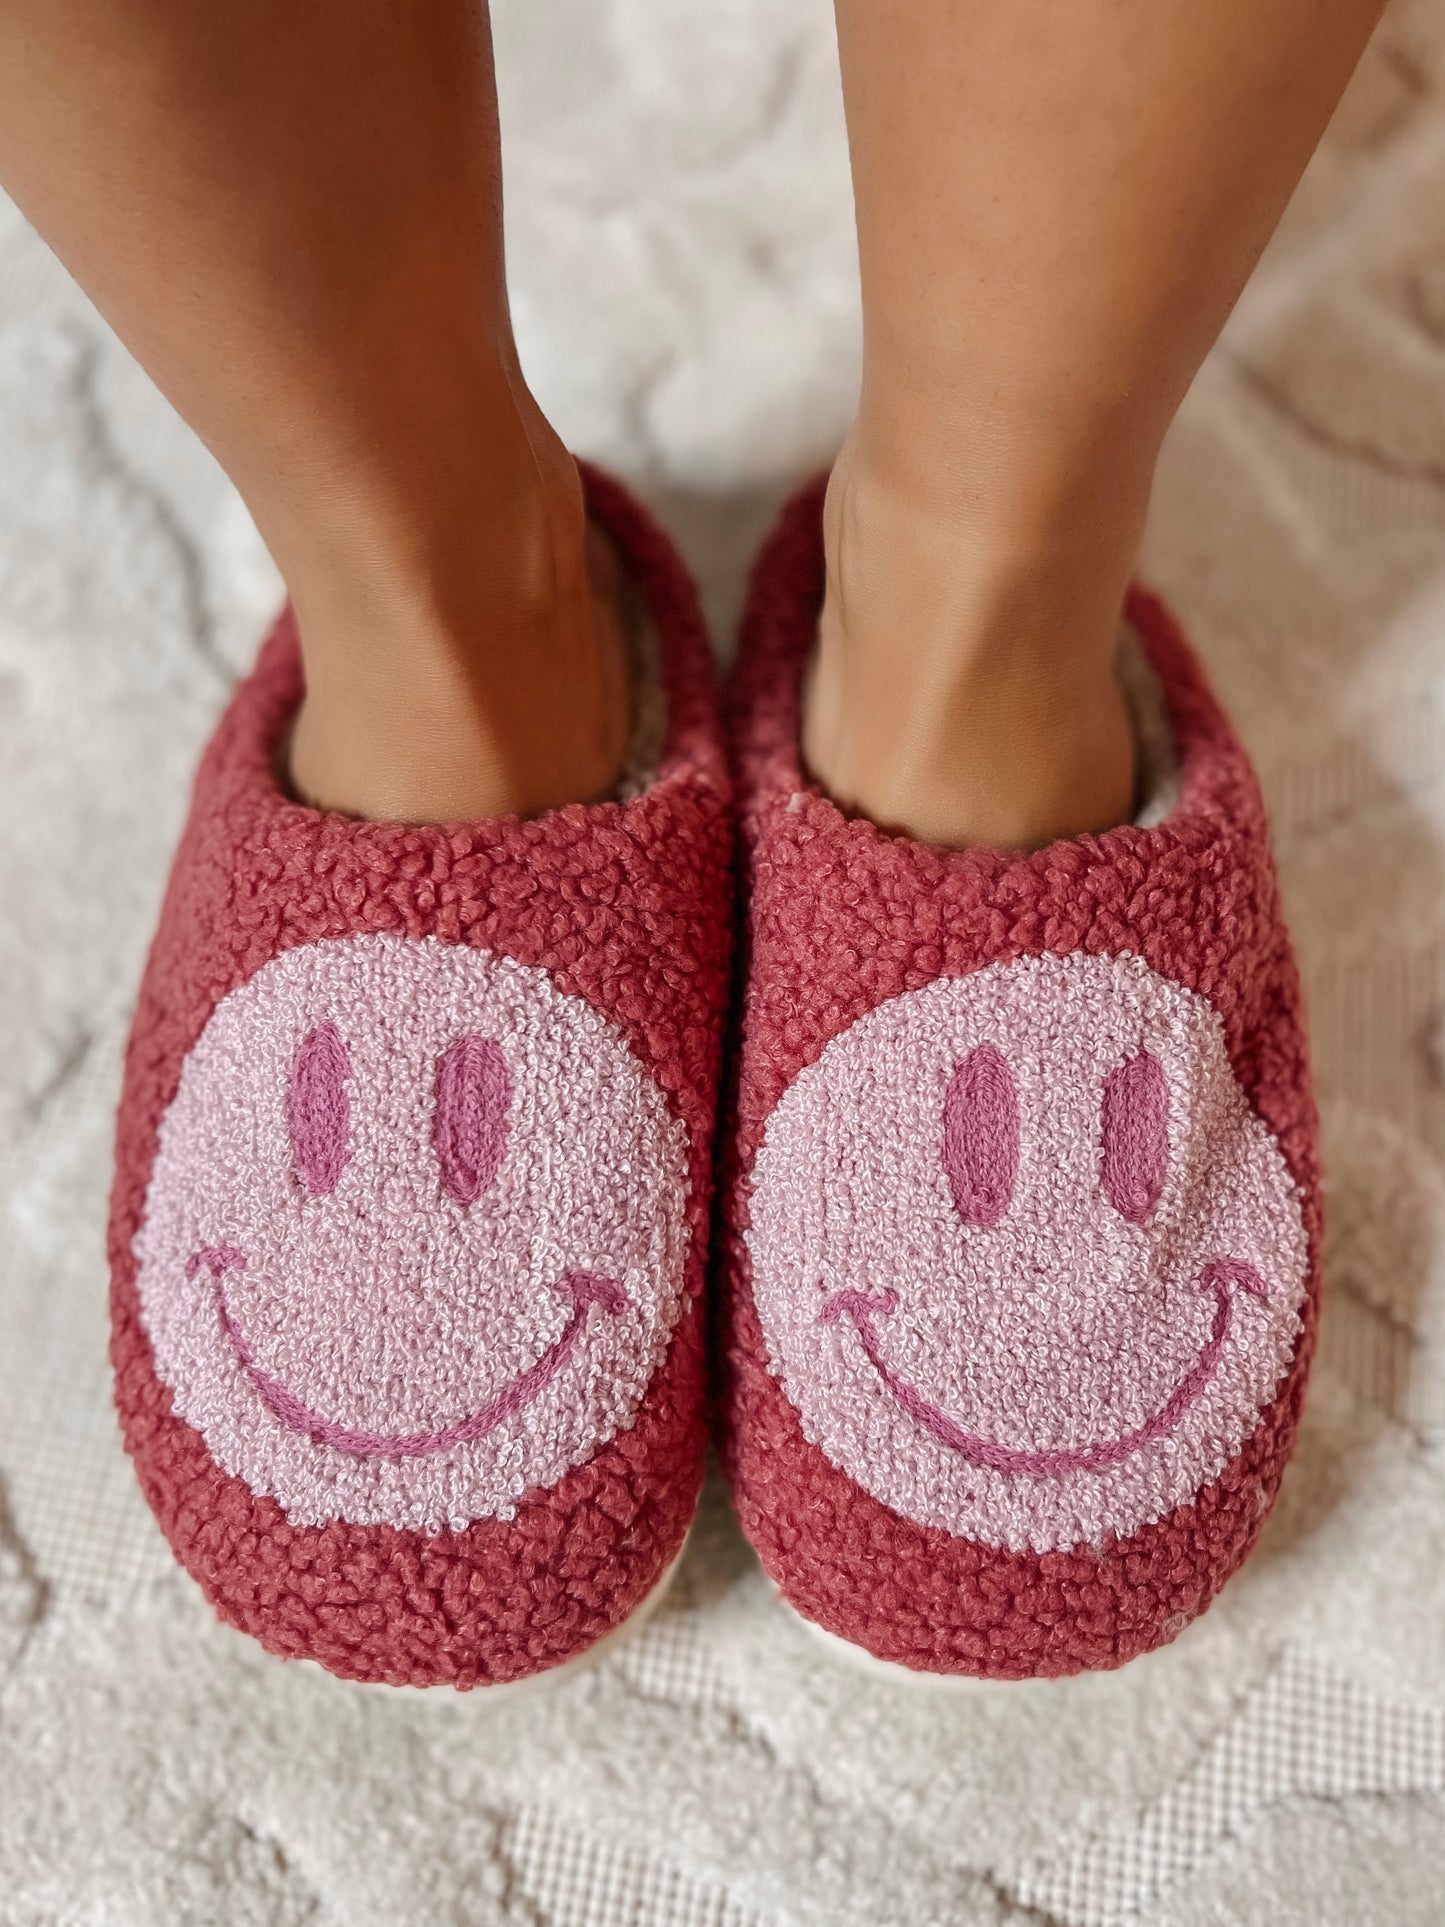 Presenting the Smiley Face Cowgirl Slippers A Delightful Footwear Experience